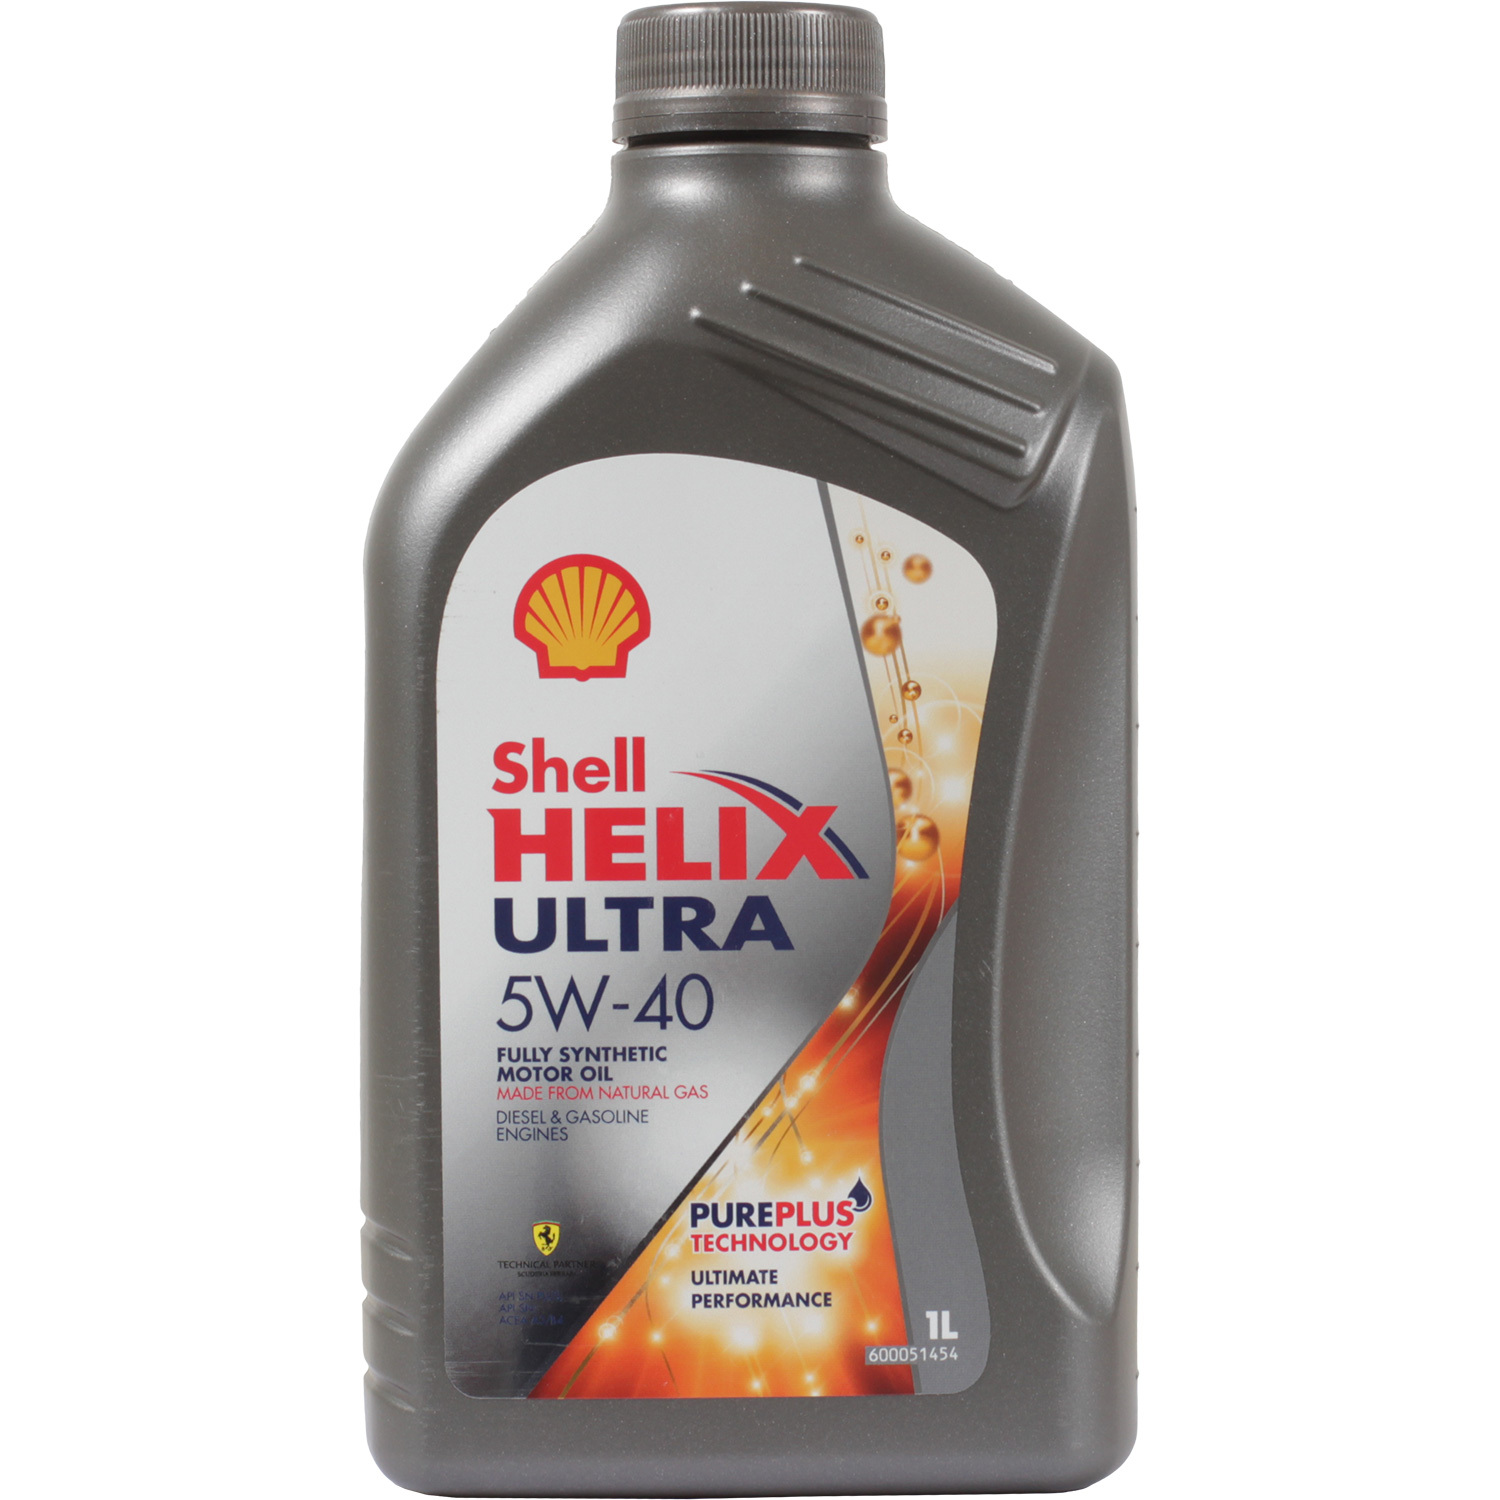 Shell Моторное масло Shell Helix Ultra 5W-40, 1 л масло моторное shell helix ultra 5w 30 4 л